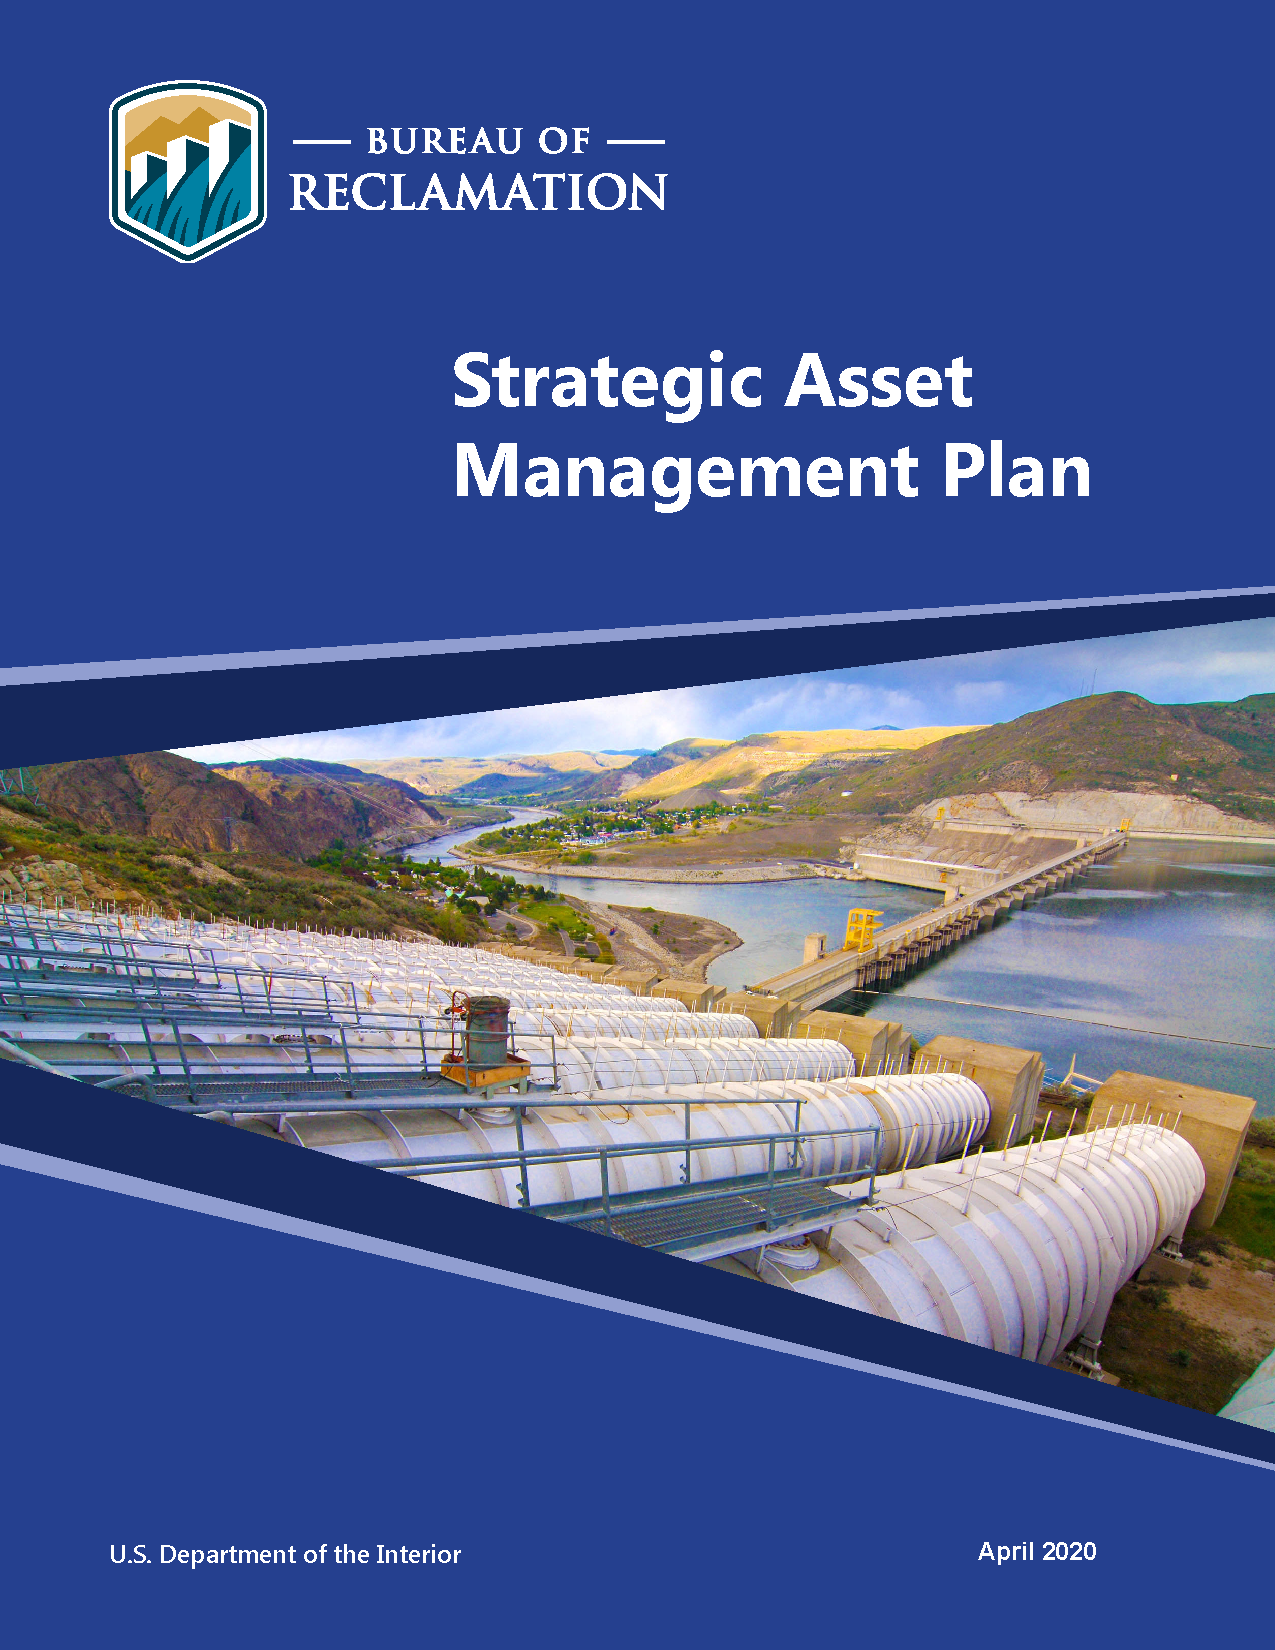 The cover of the Strategic Asset Management Plan.